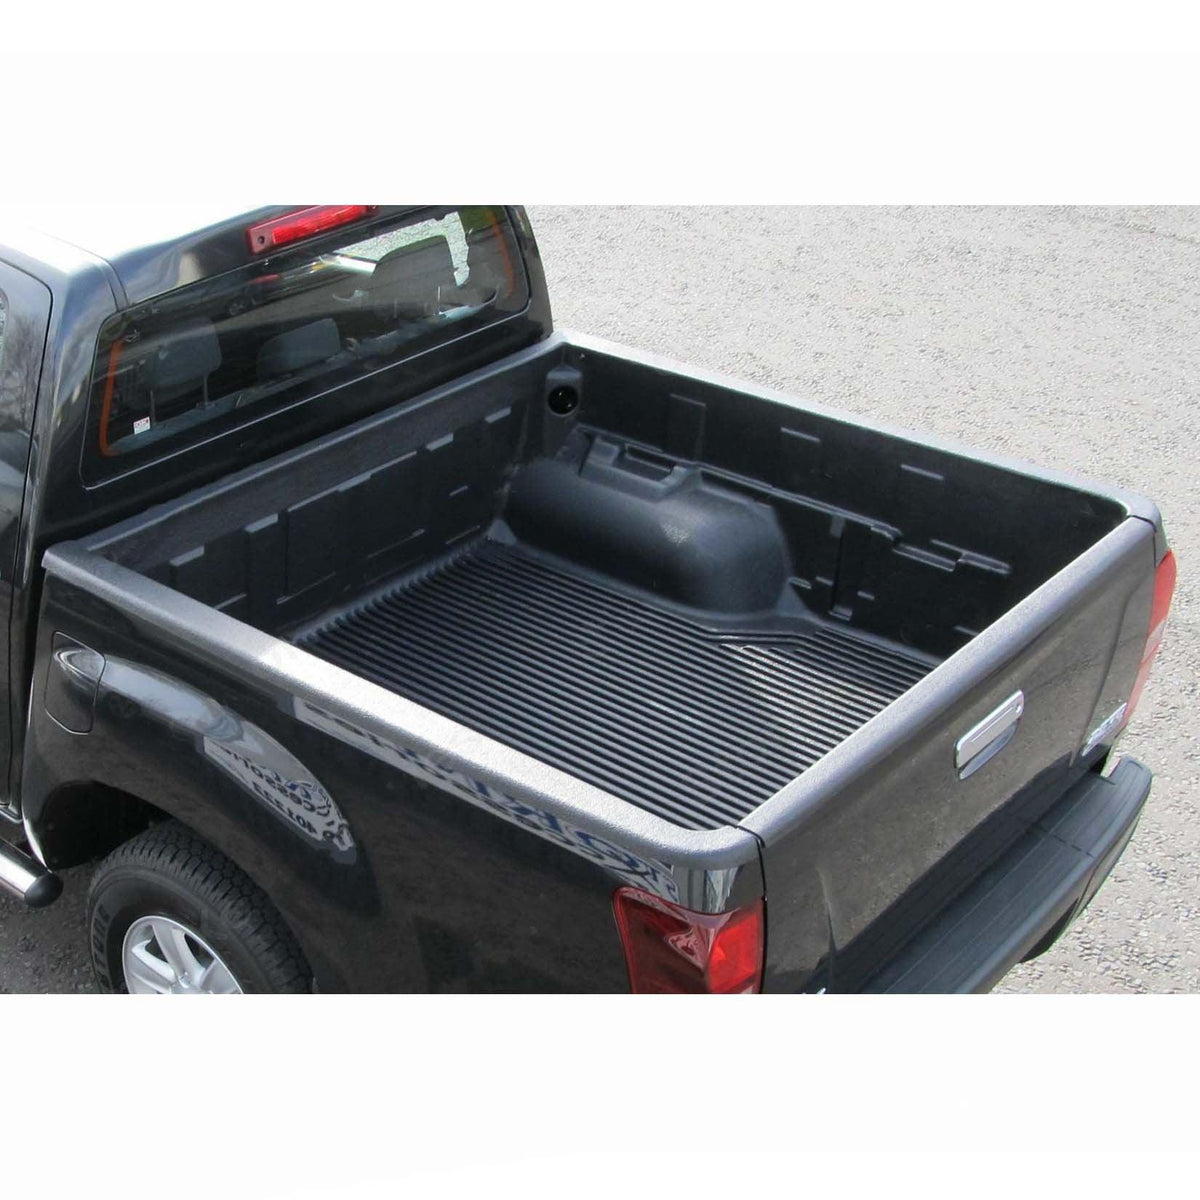 ISUZU D-MAX 2012 ON - DOUBLE CAB OVER RAIL LOAD BED LINER - Storm Xccessories2